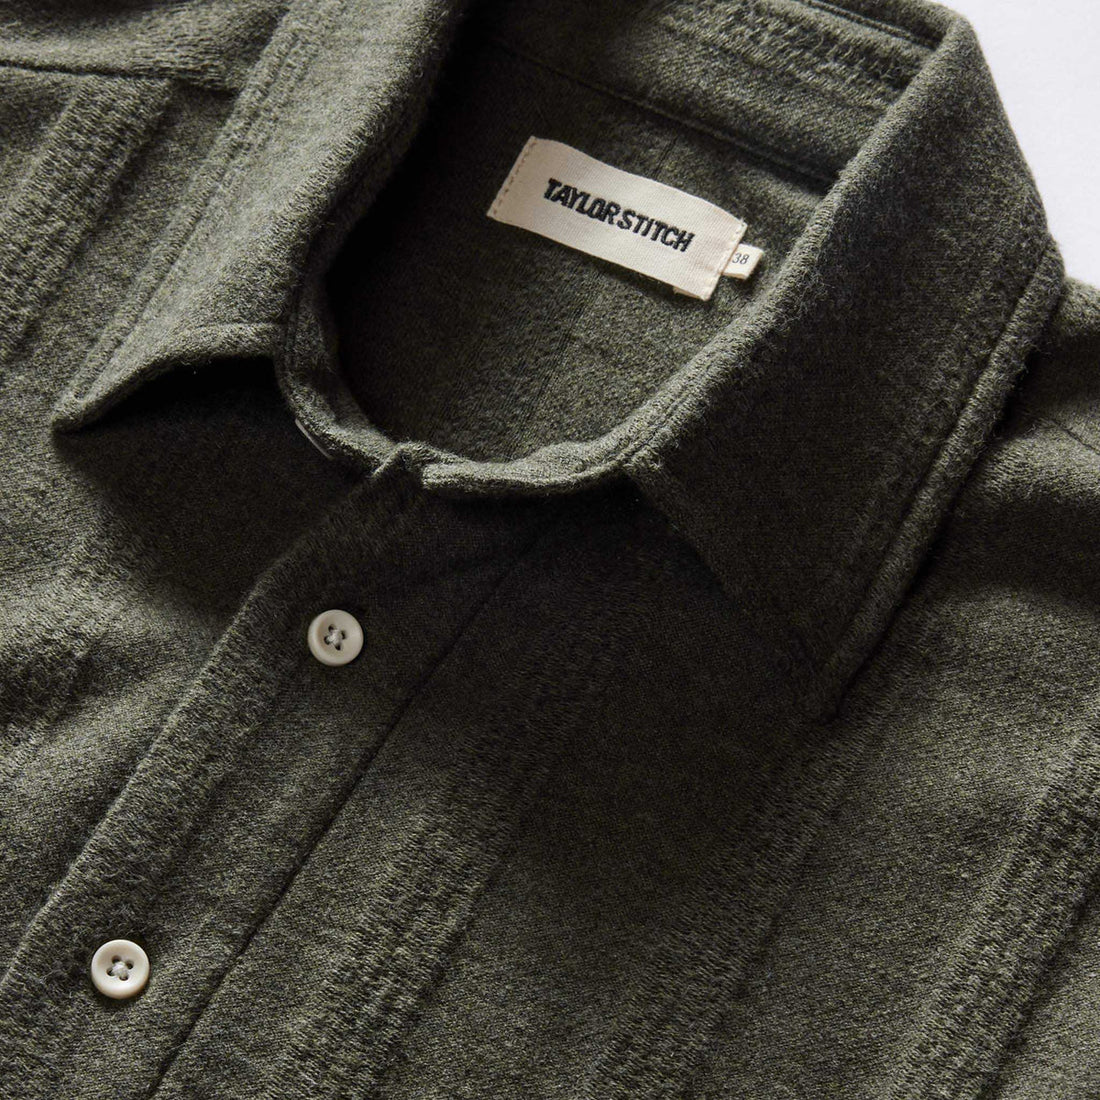 Taylor Stitch - The Short Sleeve California in Heather Olive Pointelle Stripe